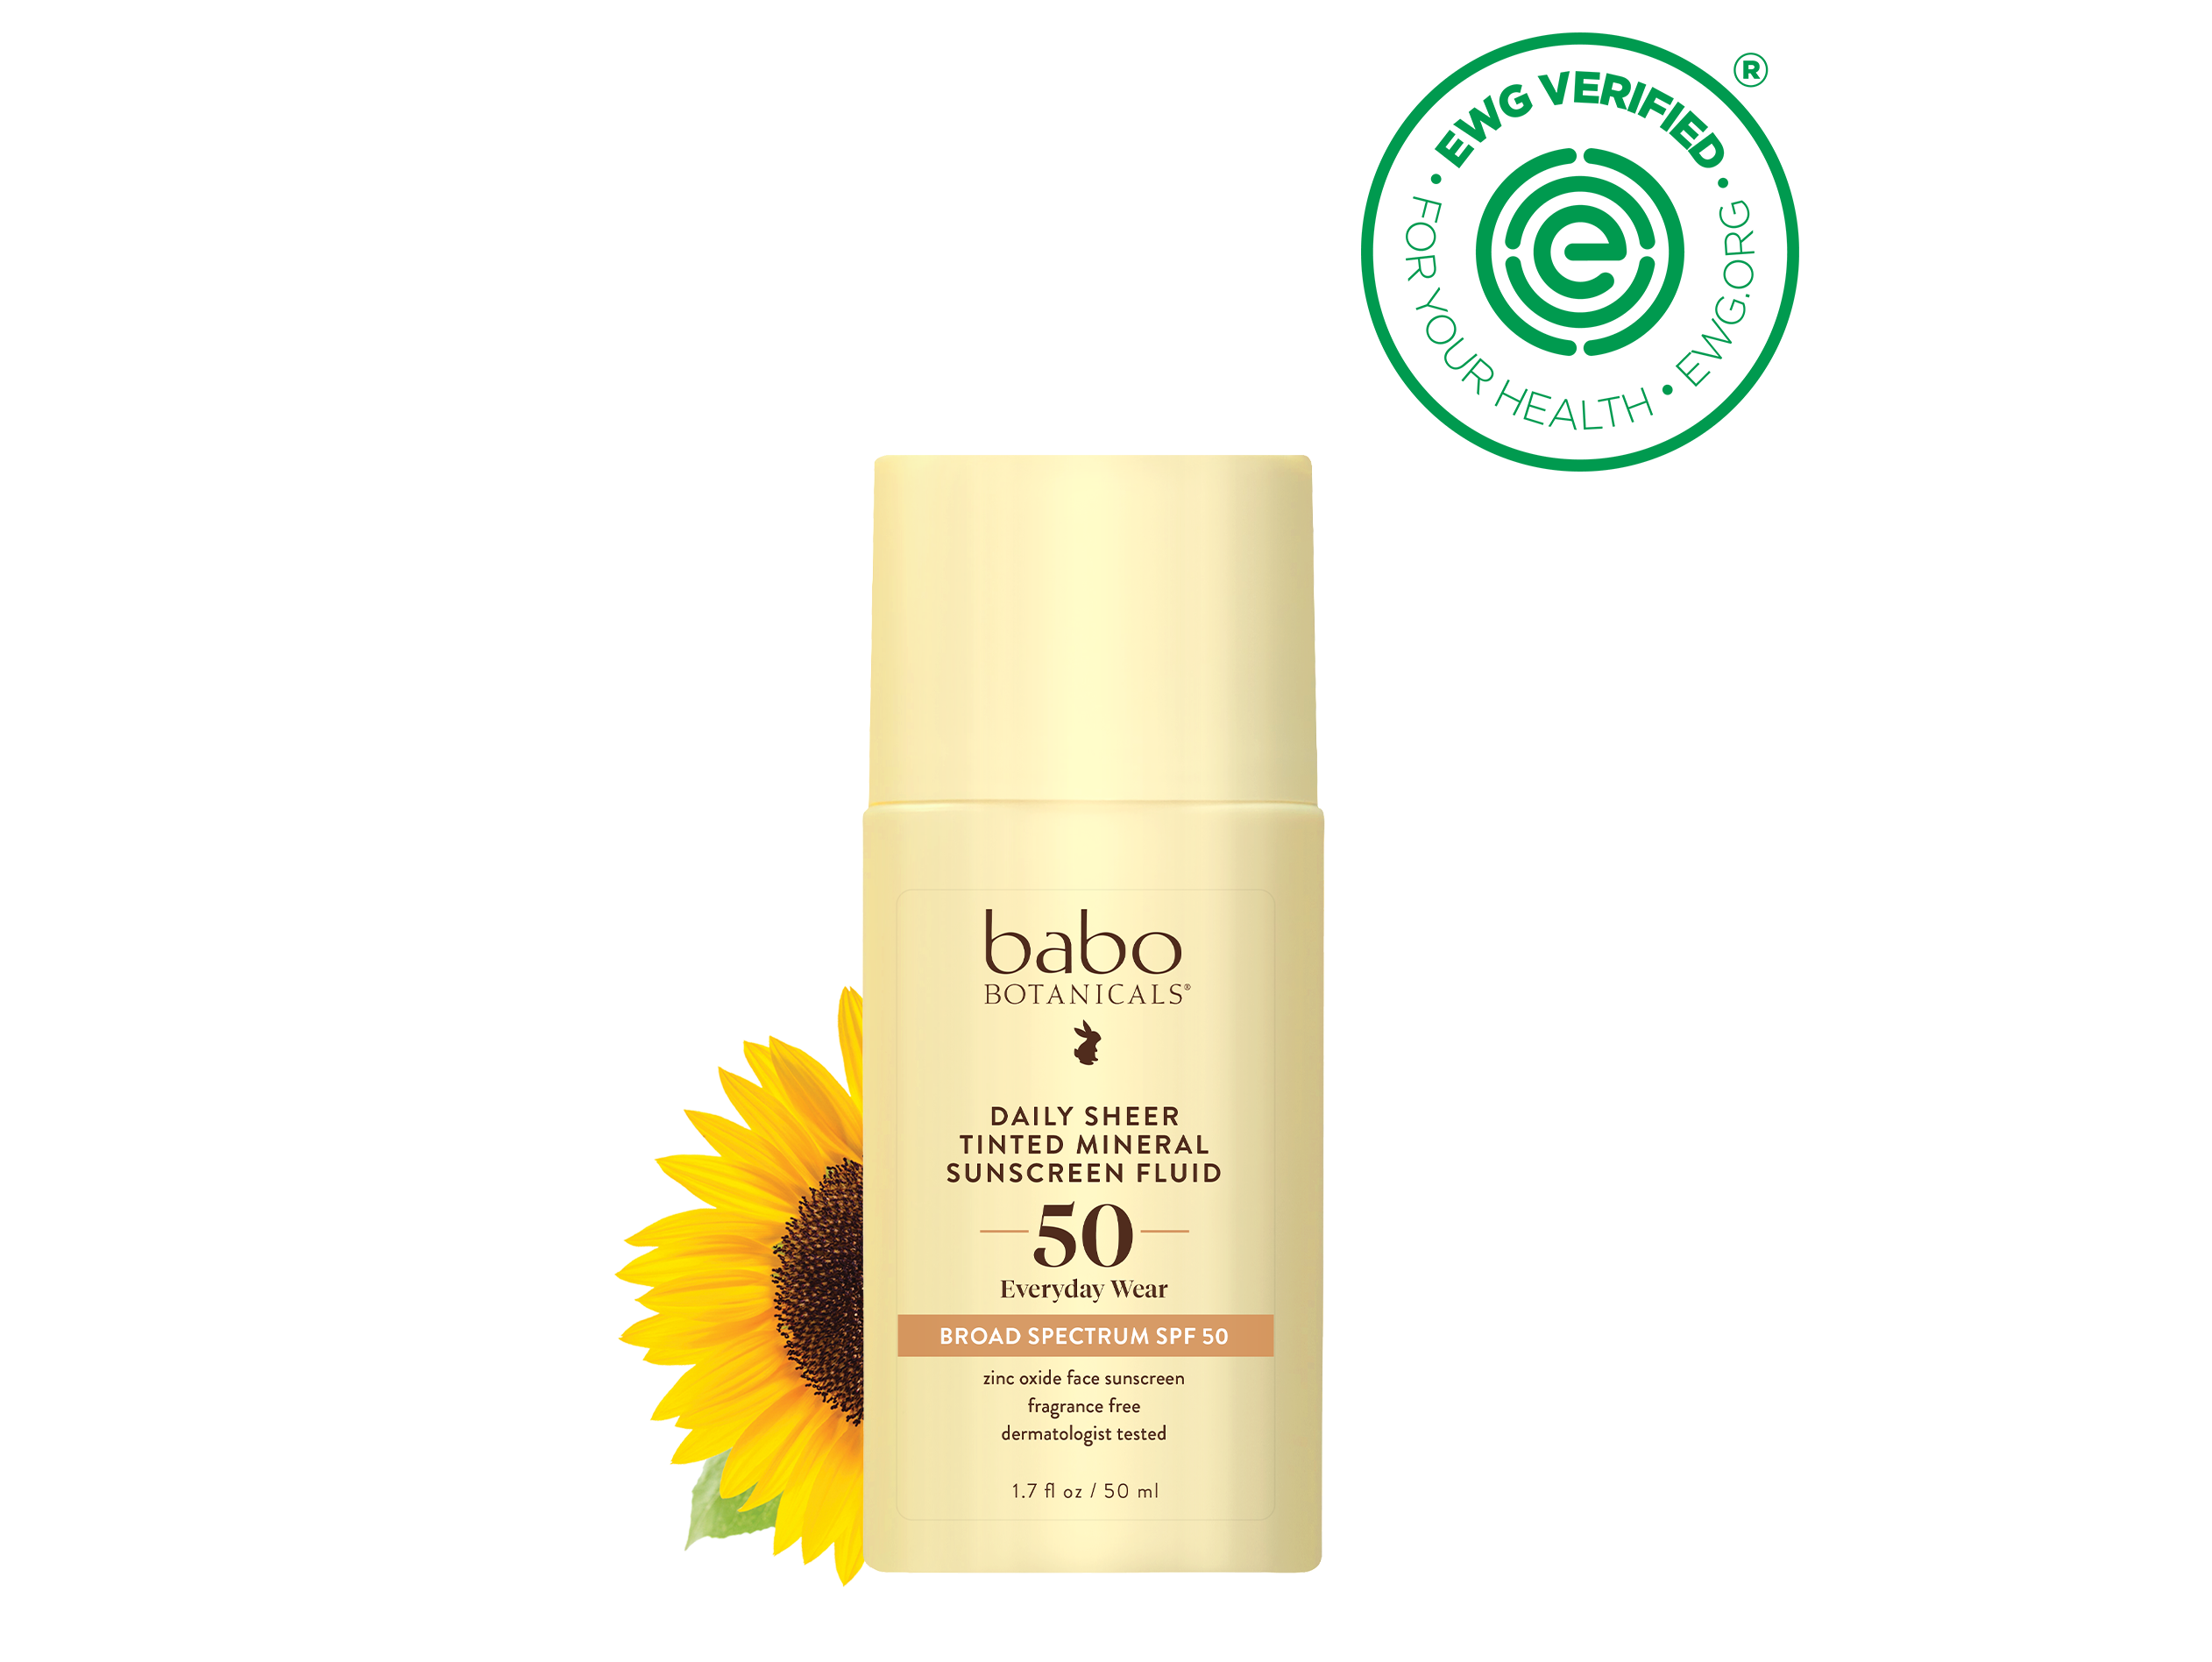 Babo Botanicals- Daily sheer tinted mineral sunscreen fluid SPF50